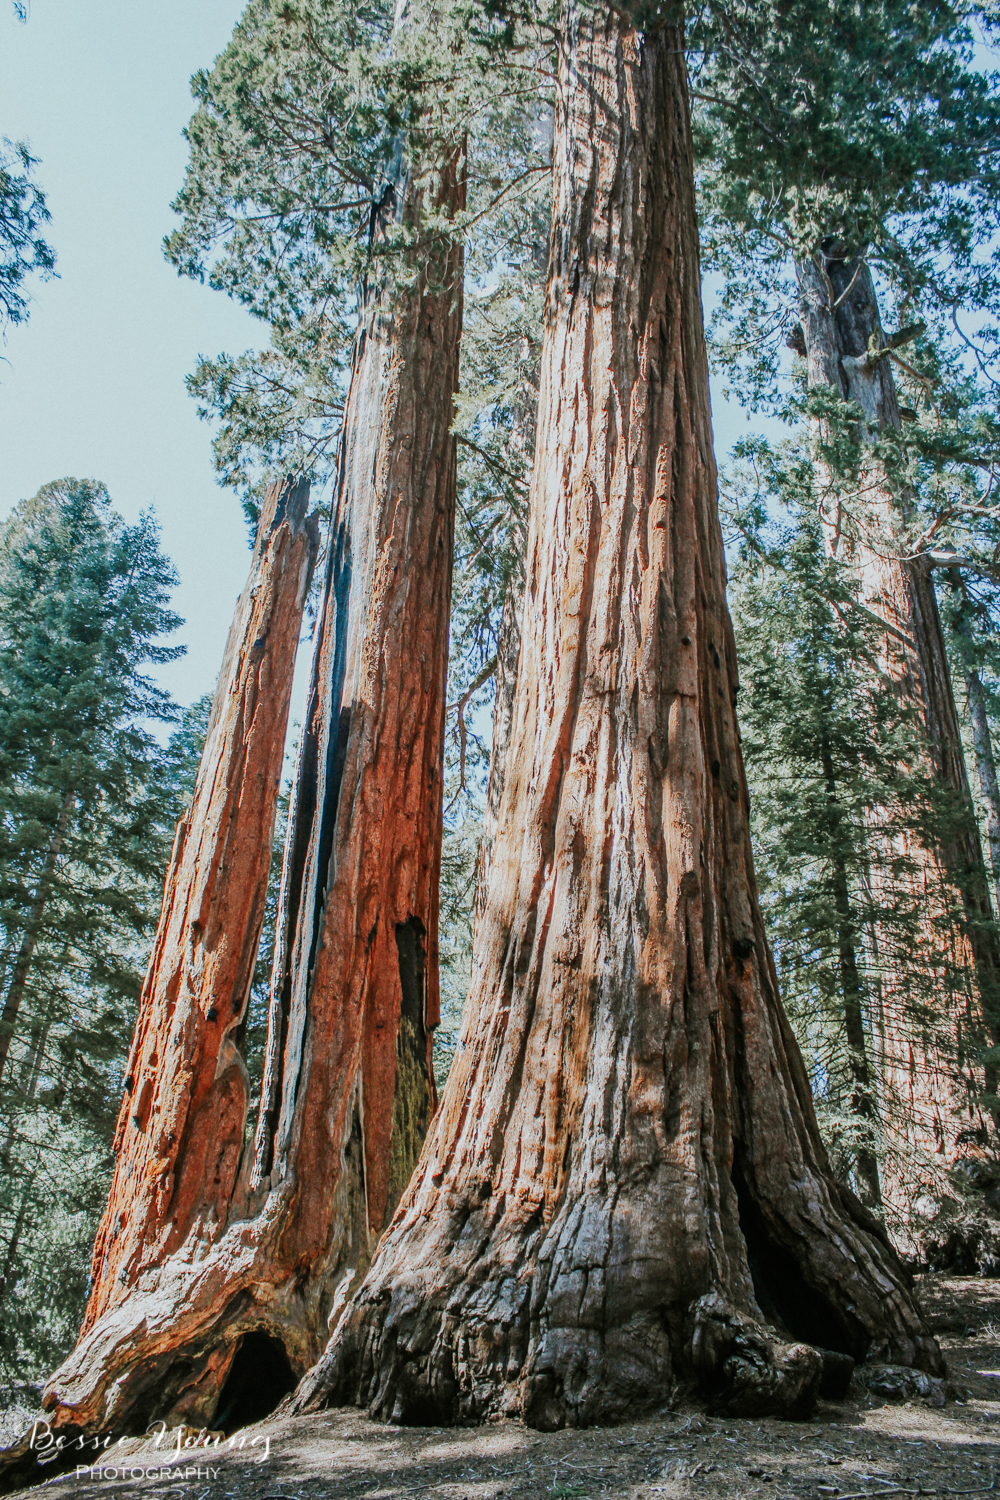 California National Parks List by Adventuring of a Small Town Girl (ASTG) - Sequoia National Park 